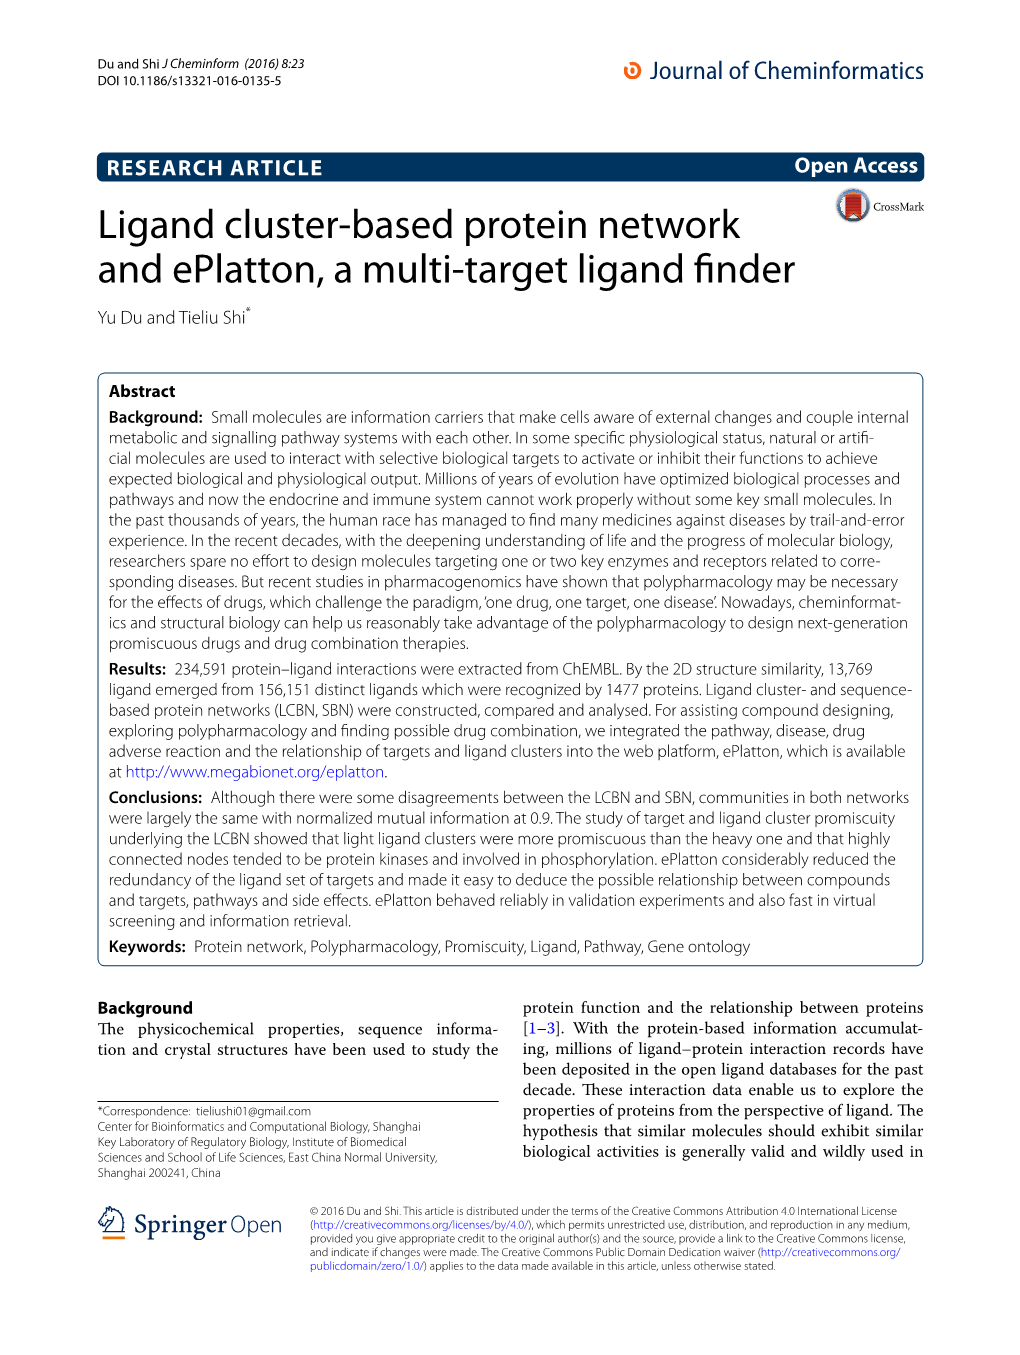 Ligand Cluster-Based Protein Network and Eplatton, a Multi-Target Ligand